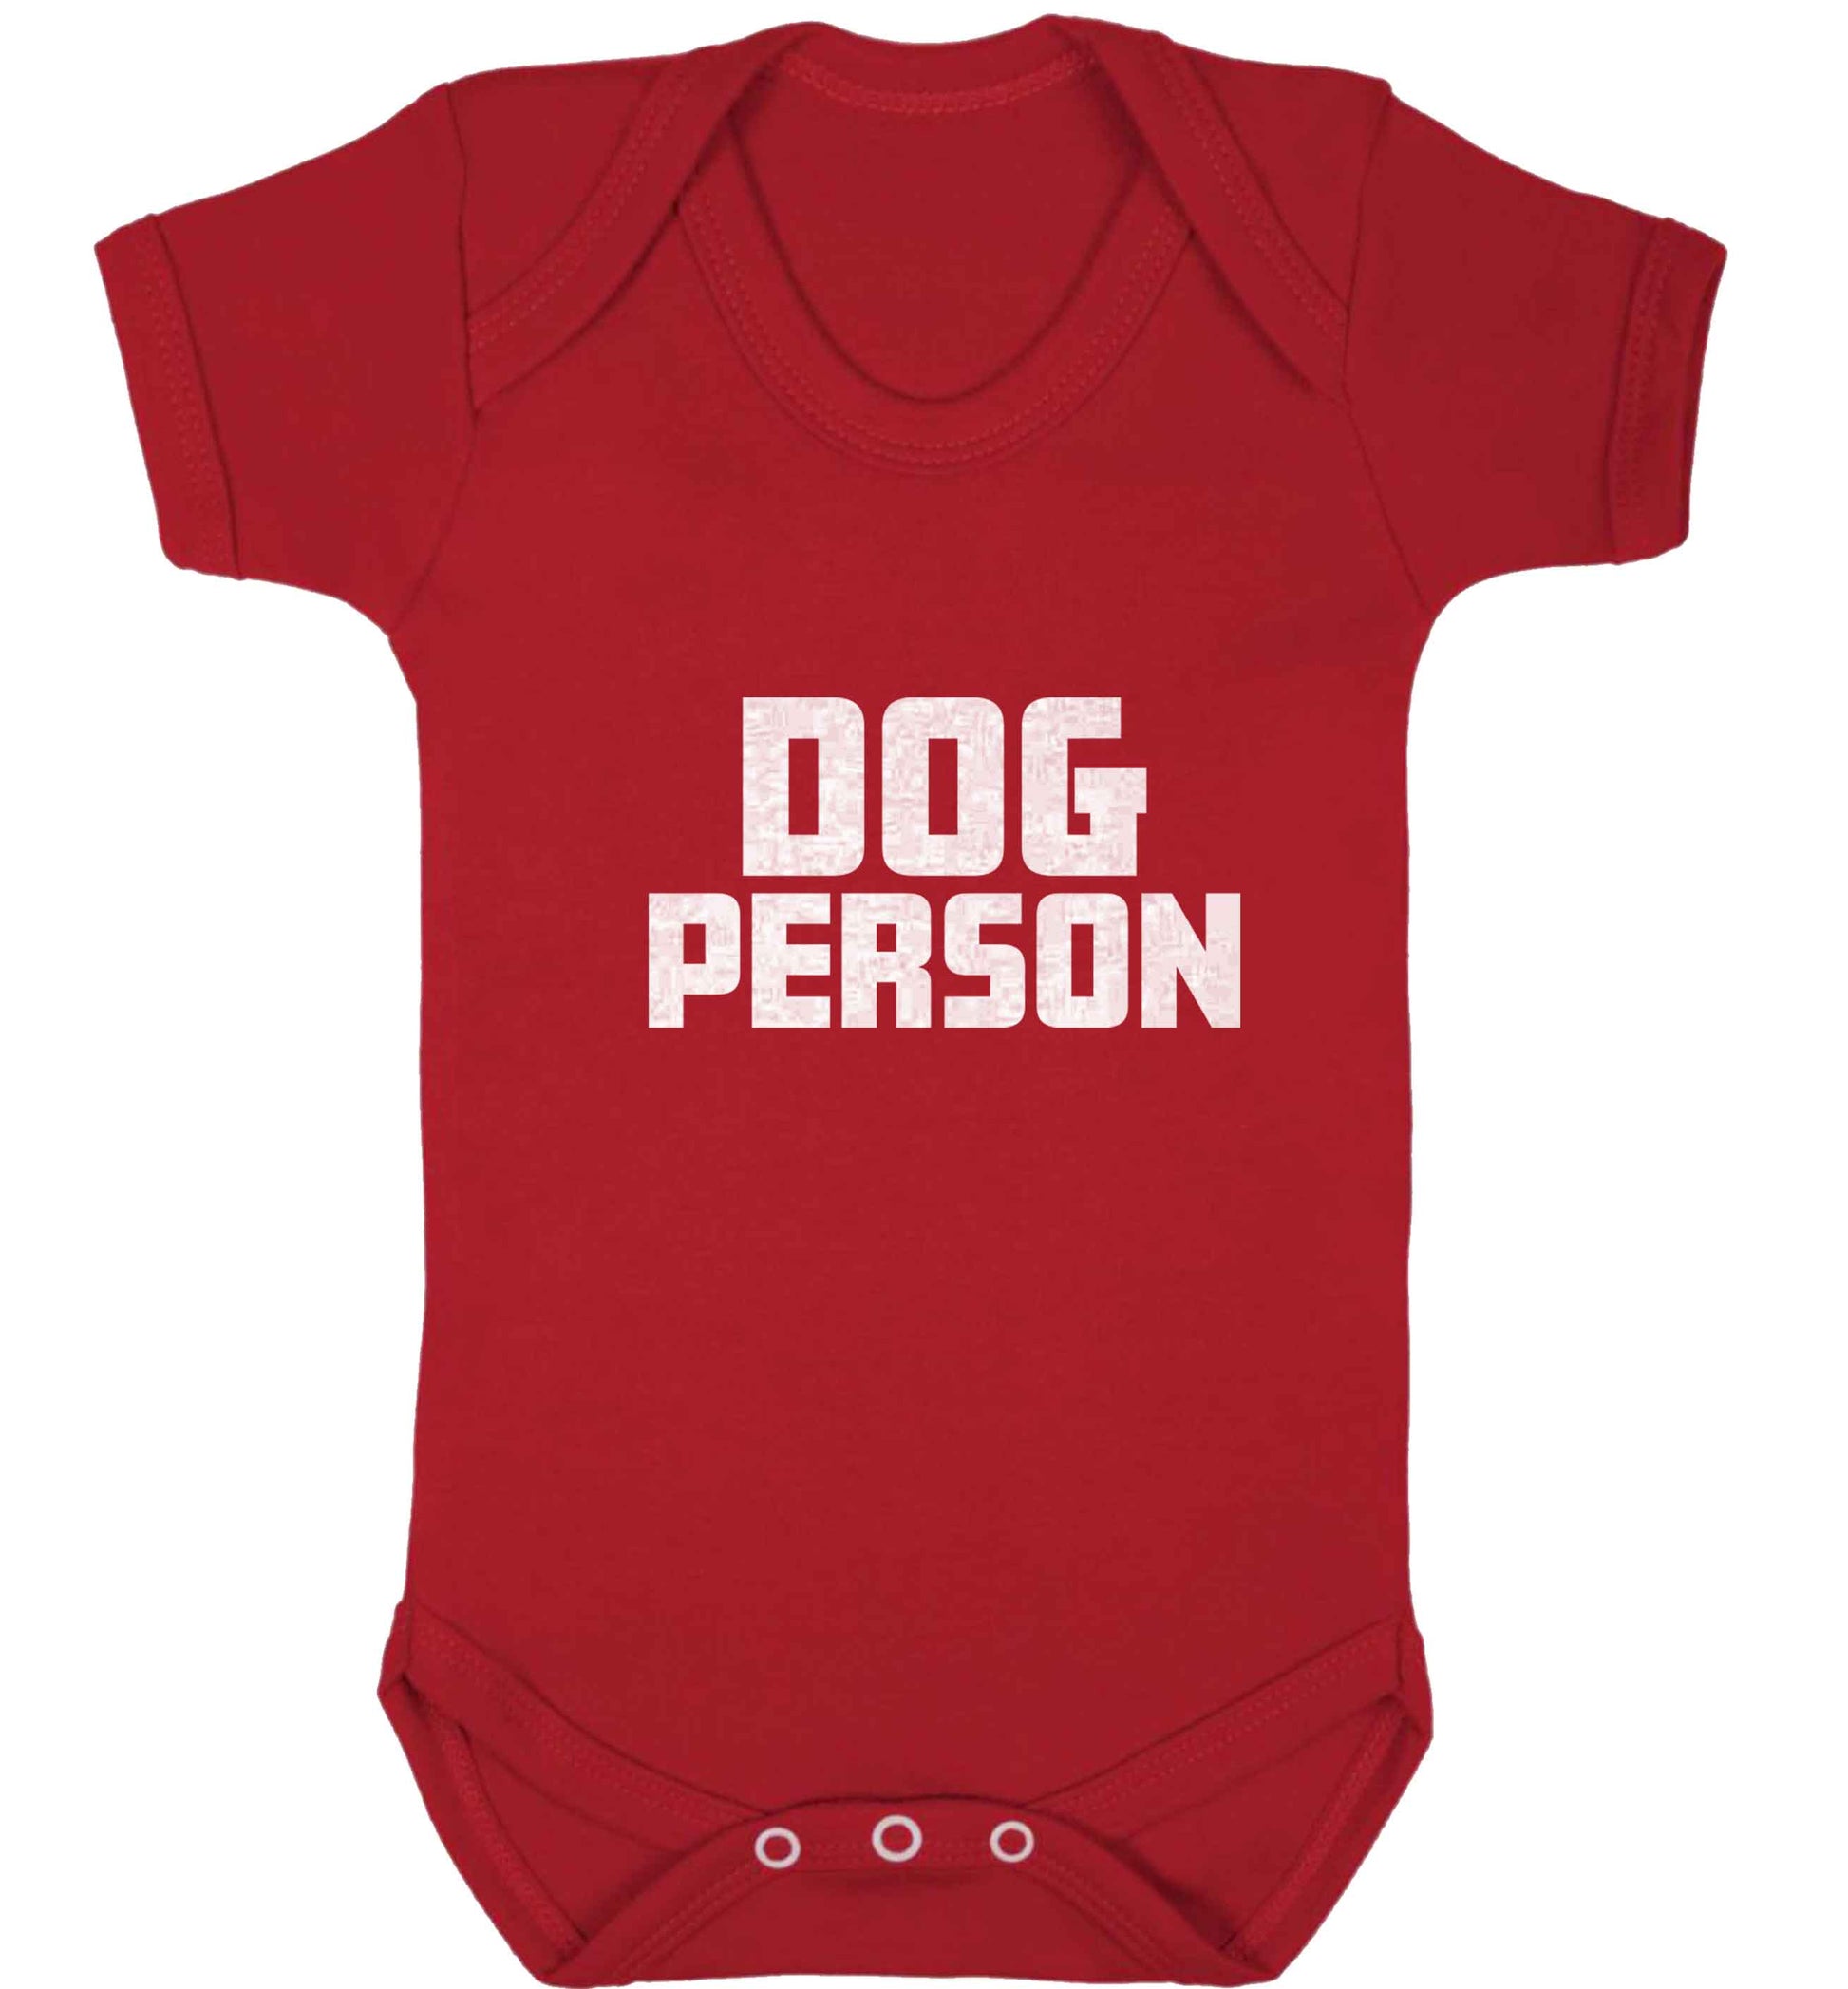 Dog Person Kit baby vest red 18-24 months